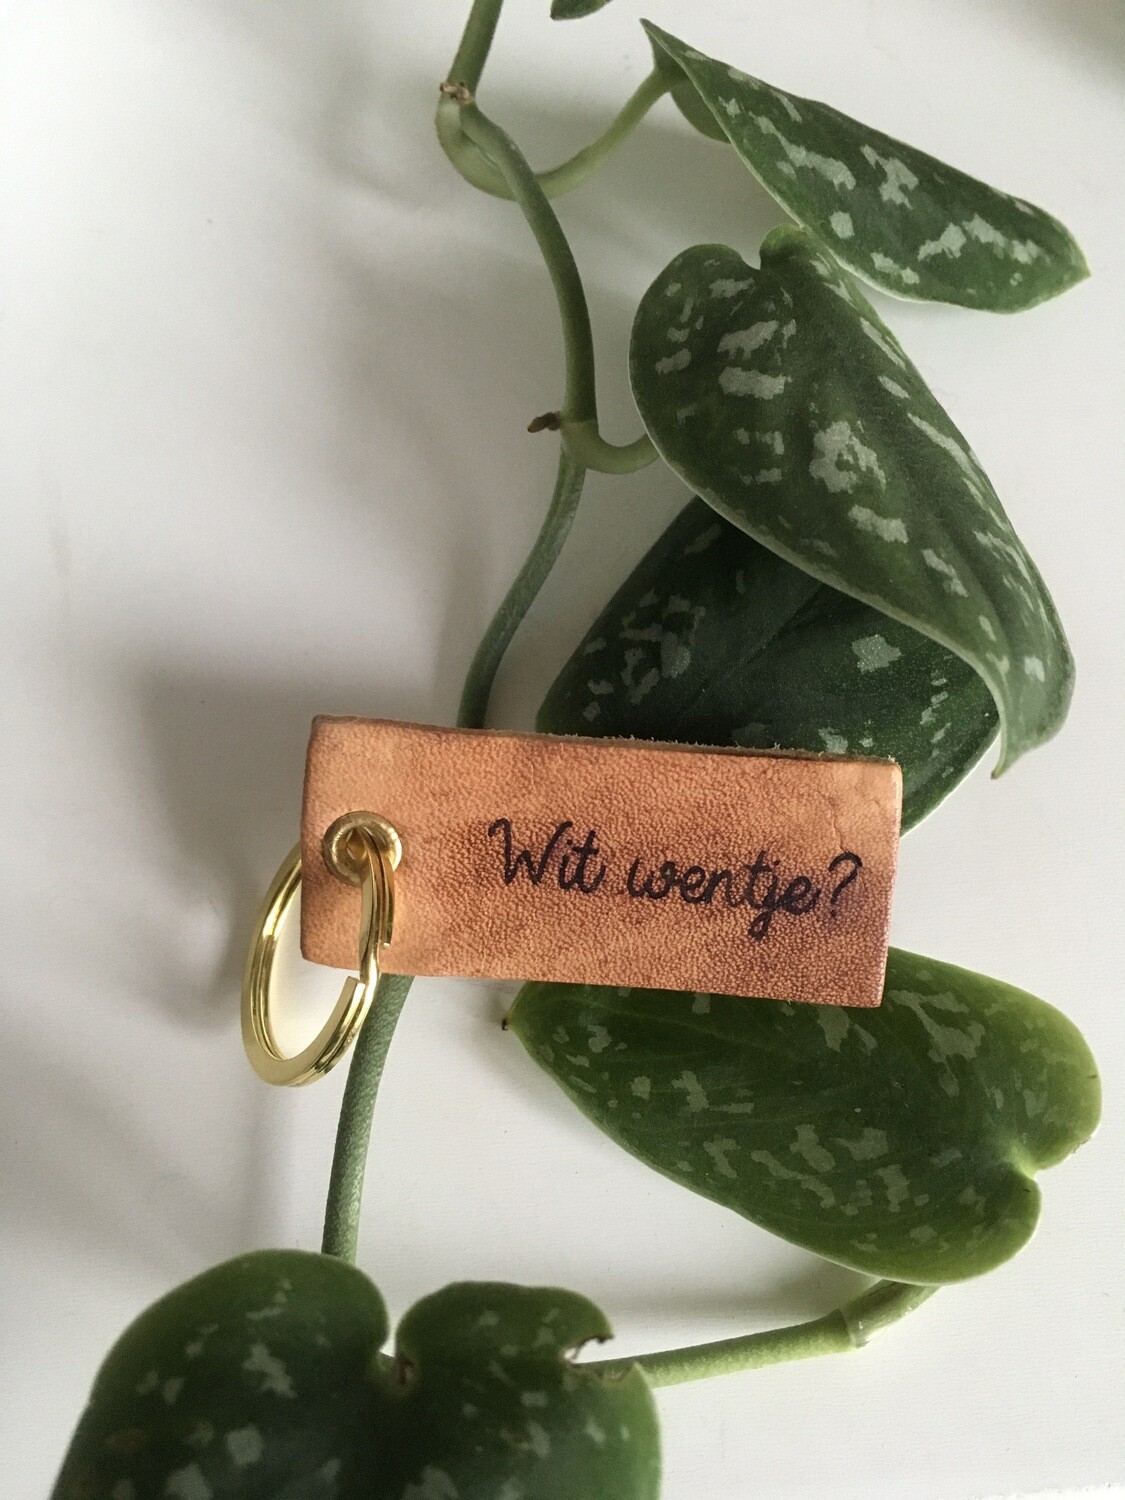 ‘Wit wentje’